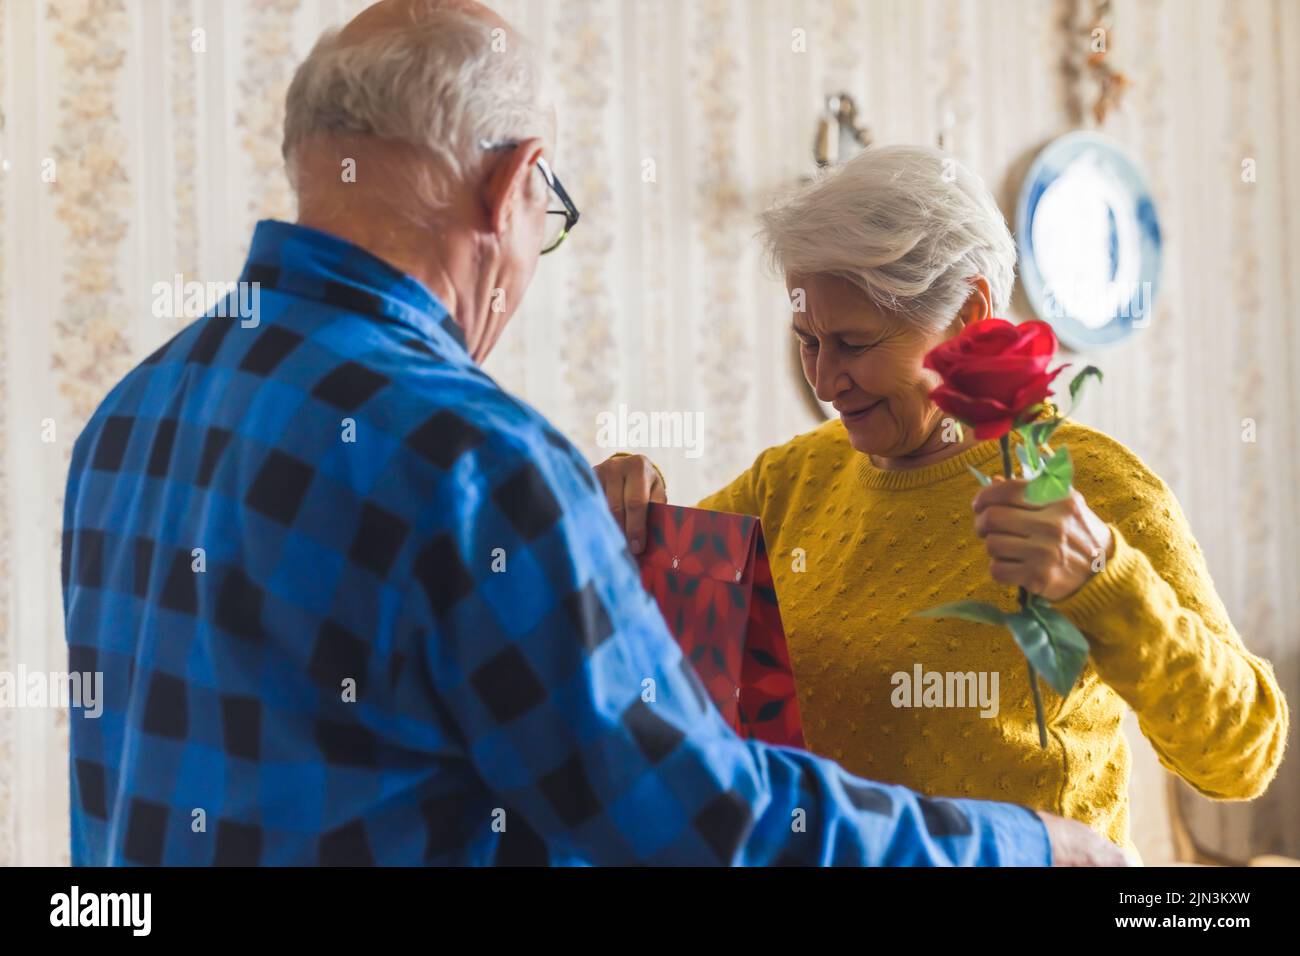 Happy women's day. Caring and loving caucasian elderly husband surprising his wife with a red rose and a gift bag. High quality photo Stock Photo